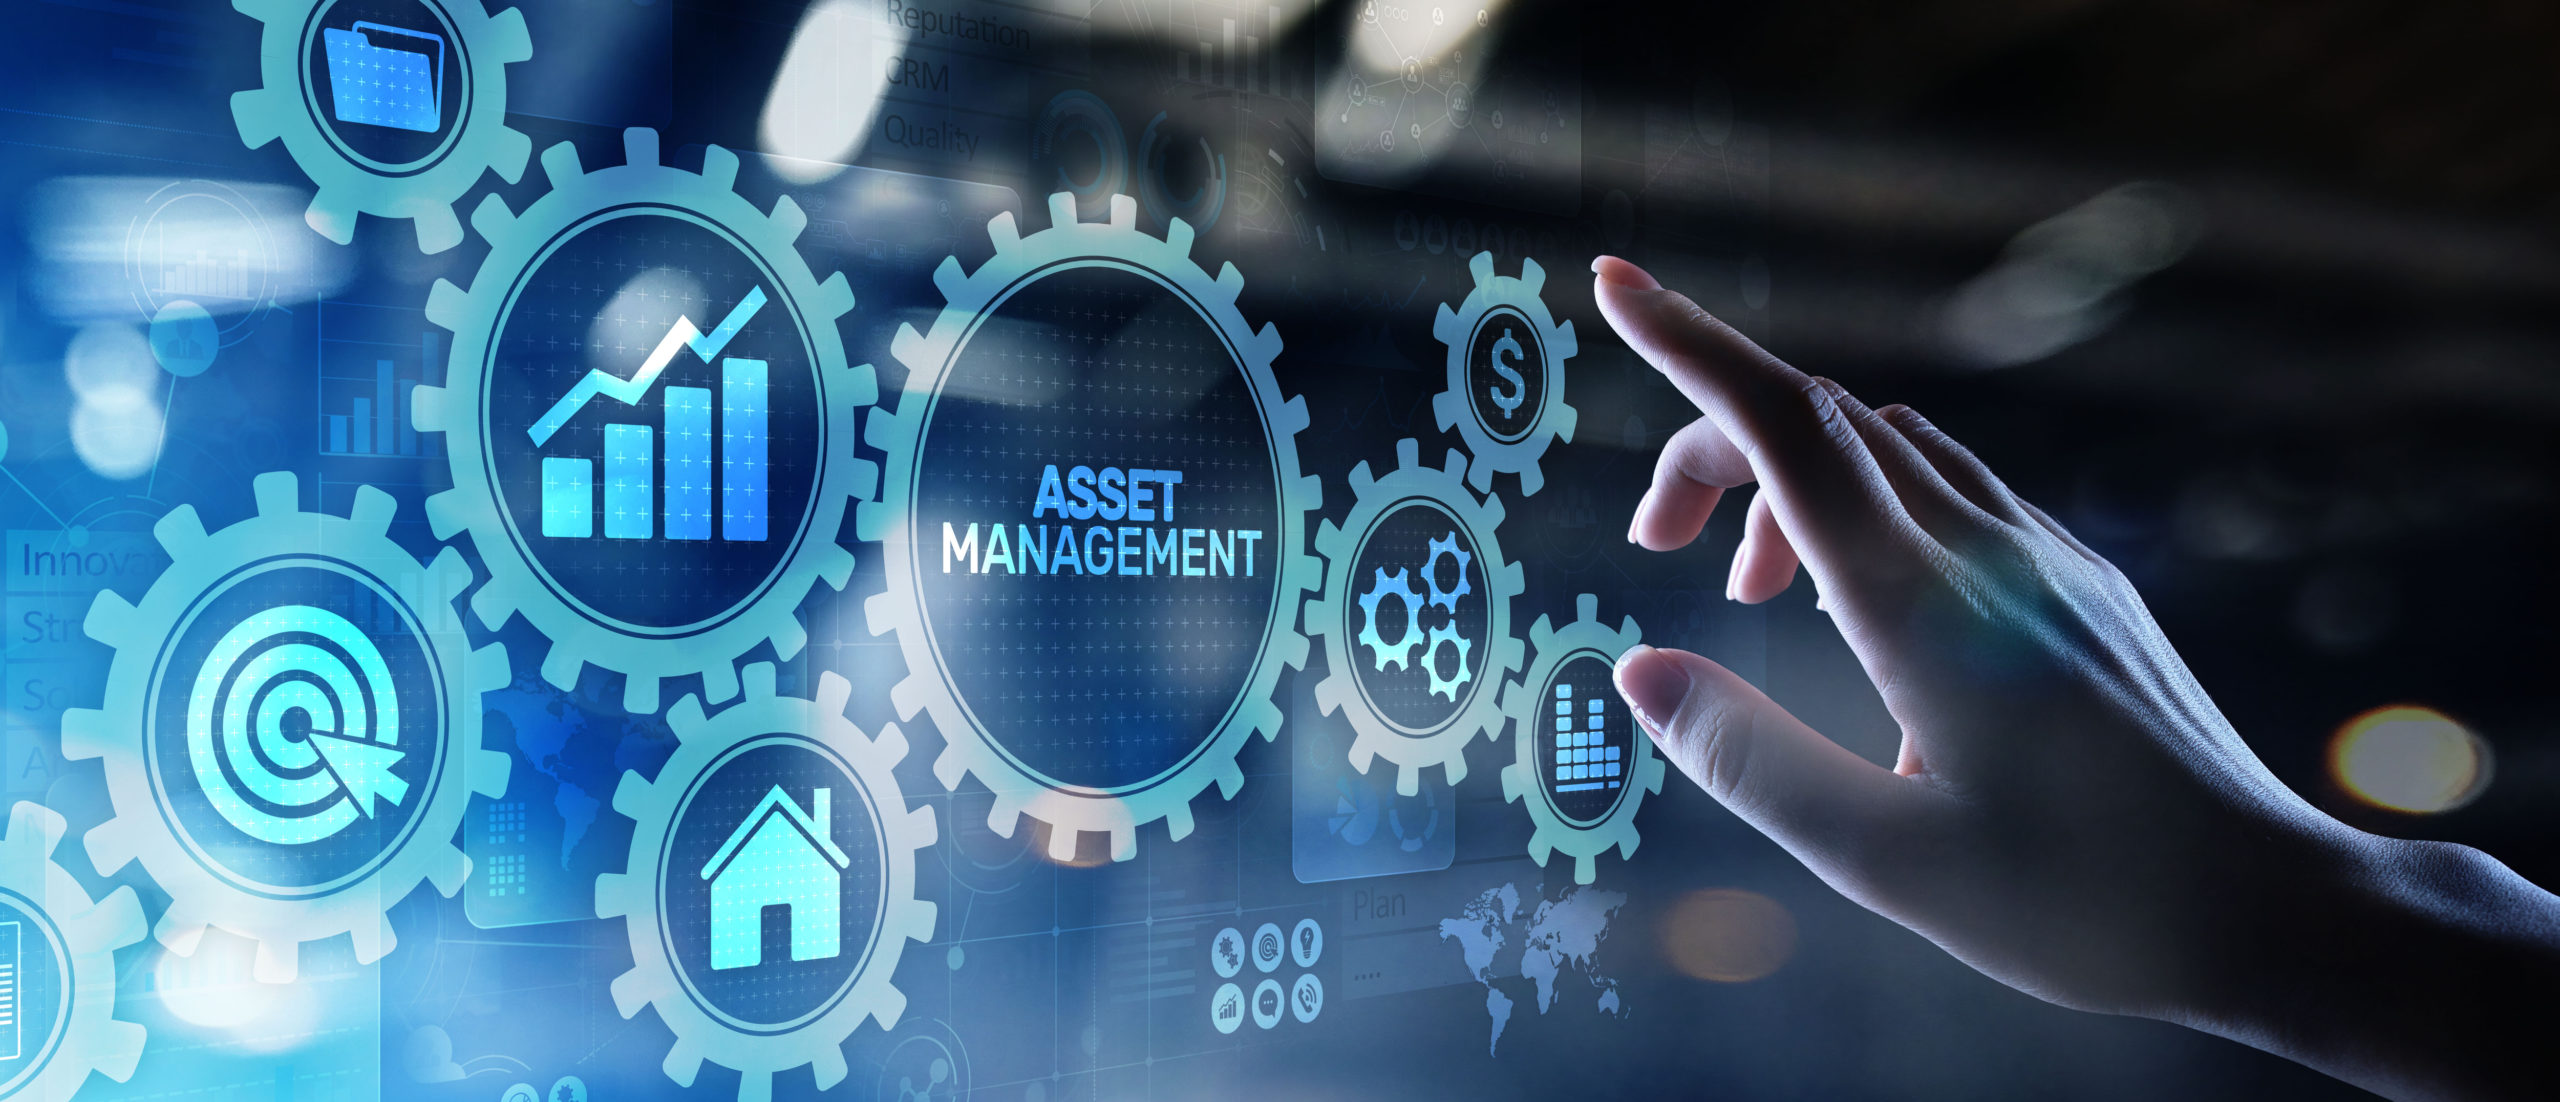 Asset Management Weldon Spring, MO | Financial Planners | Investment Advisors | Wealth Management